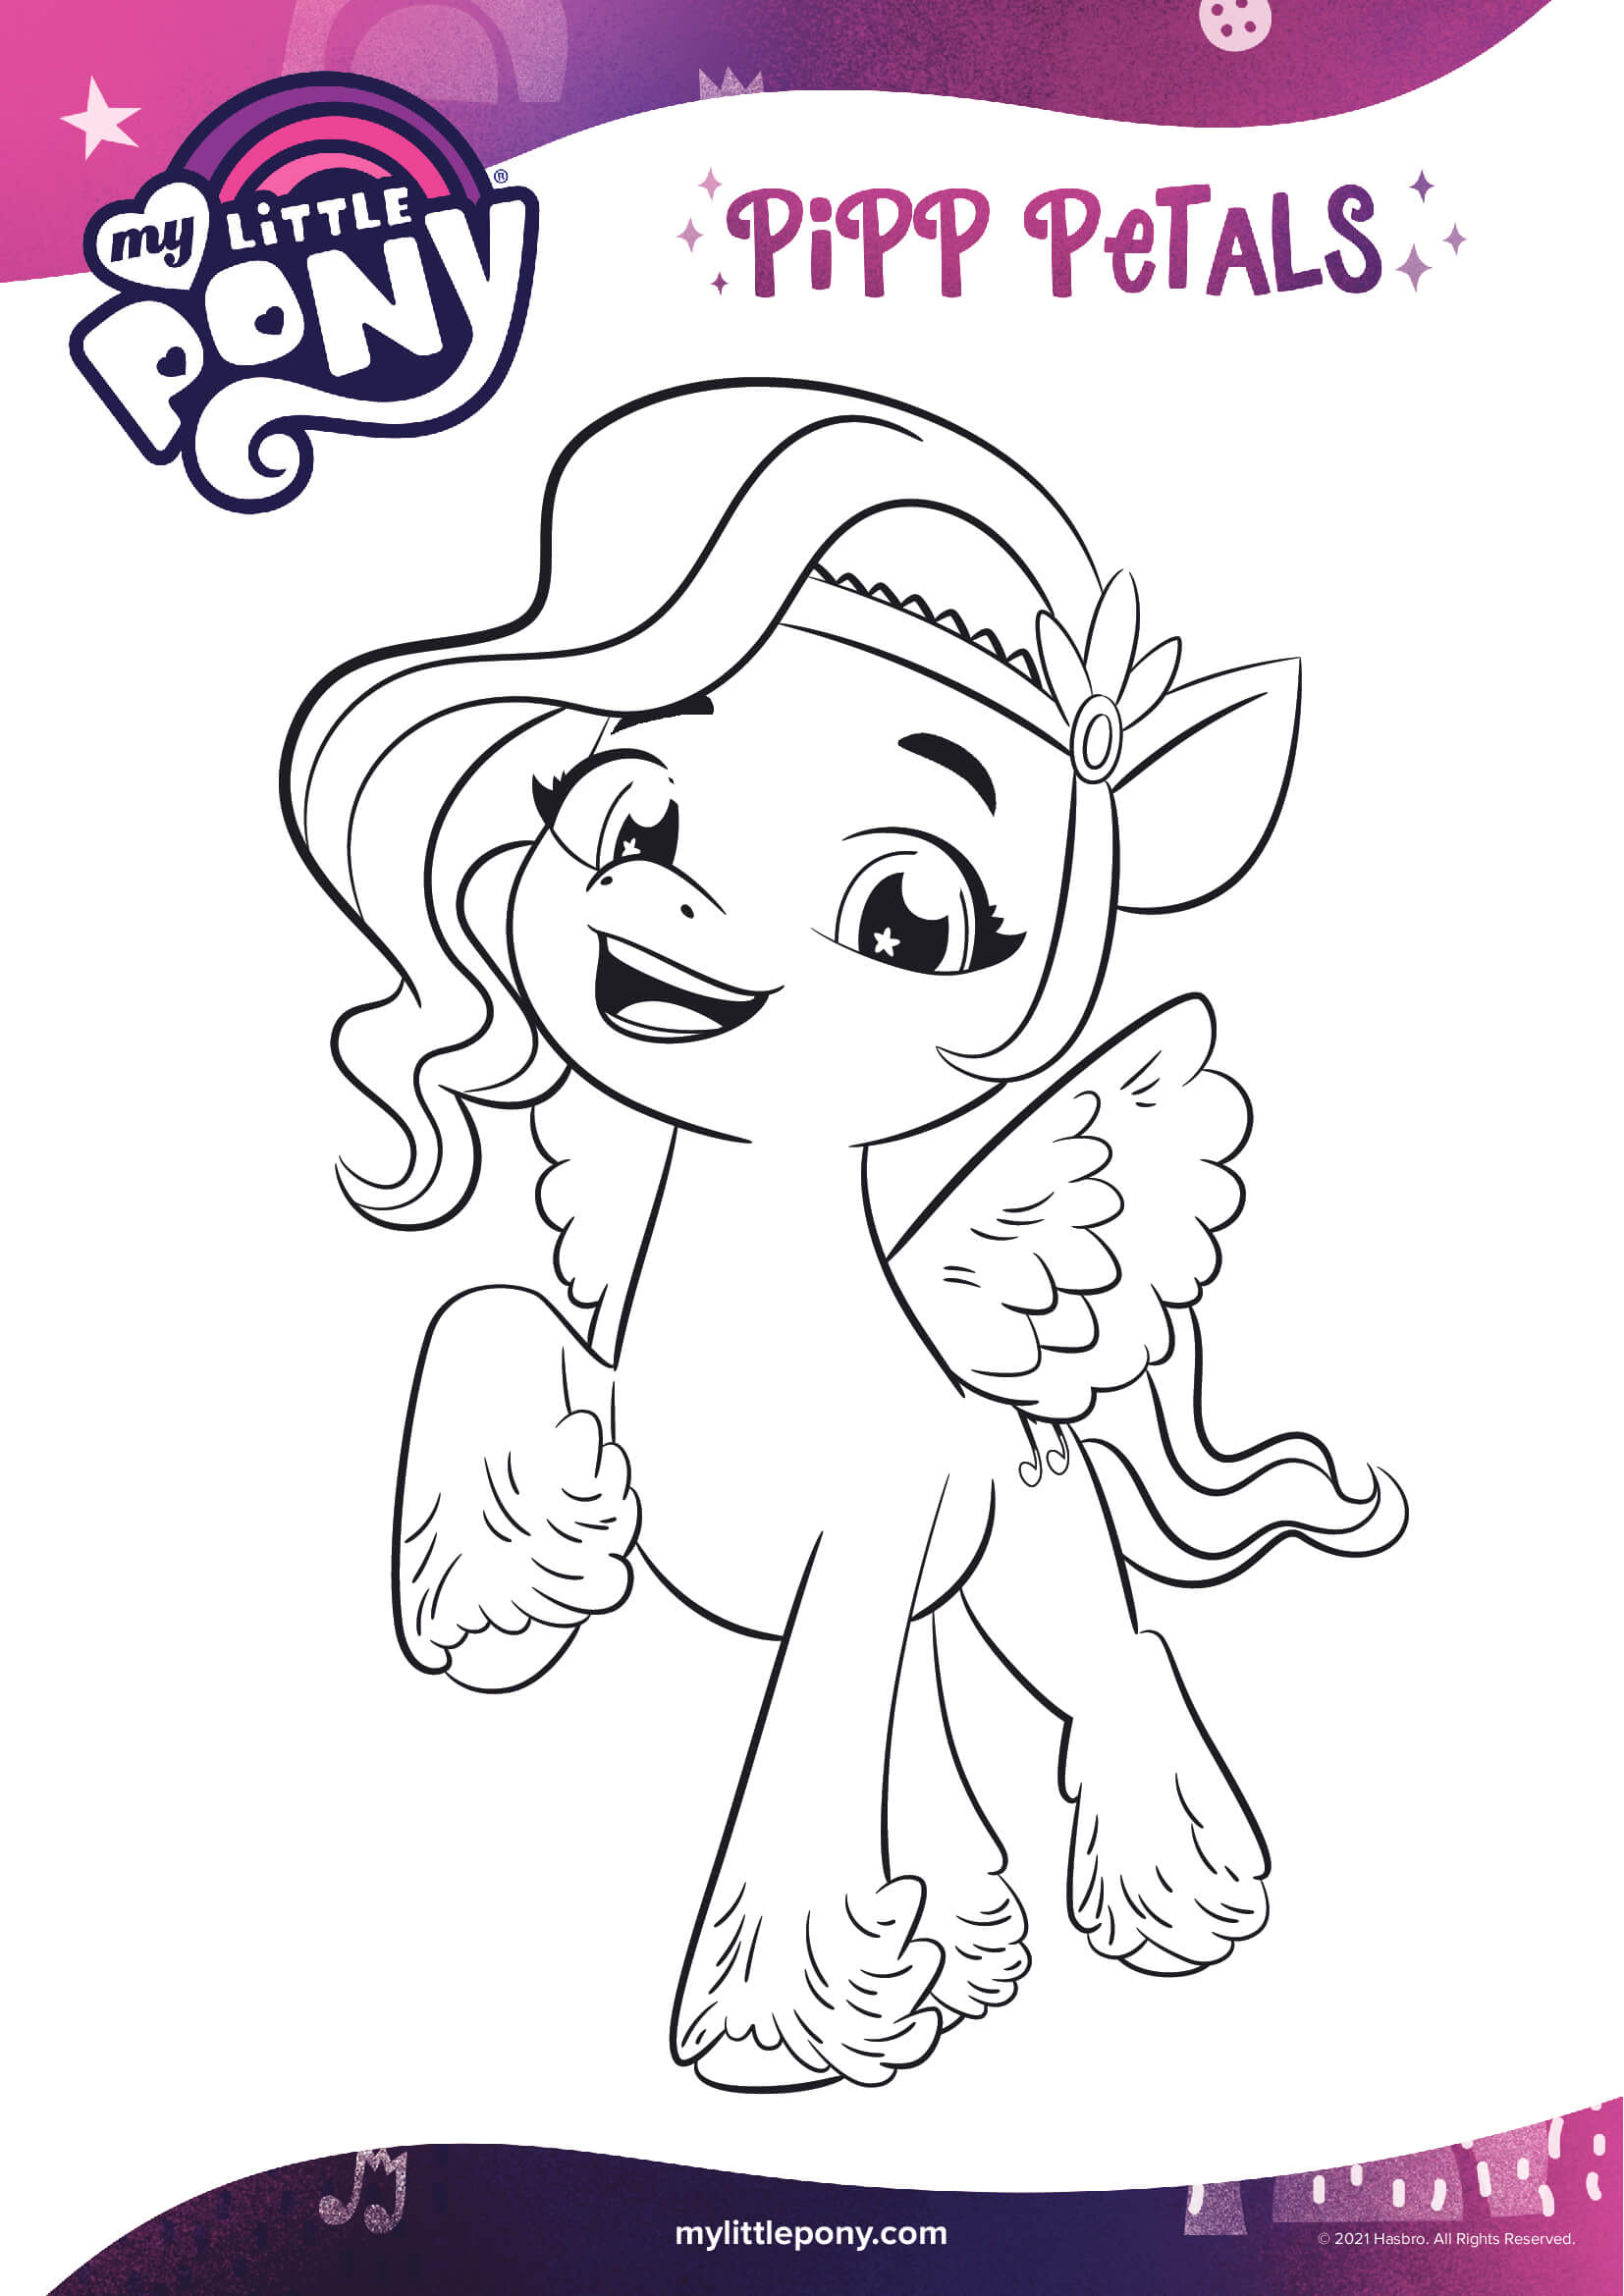 Pipp Petals Is A Pop Star Princess Of Zephyr Heights Mlp 5 Coloring Page